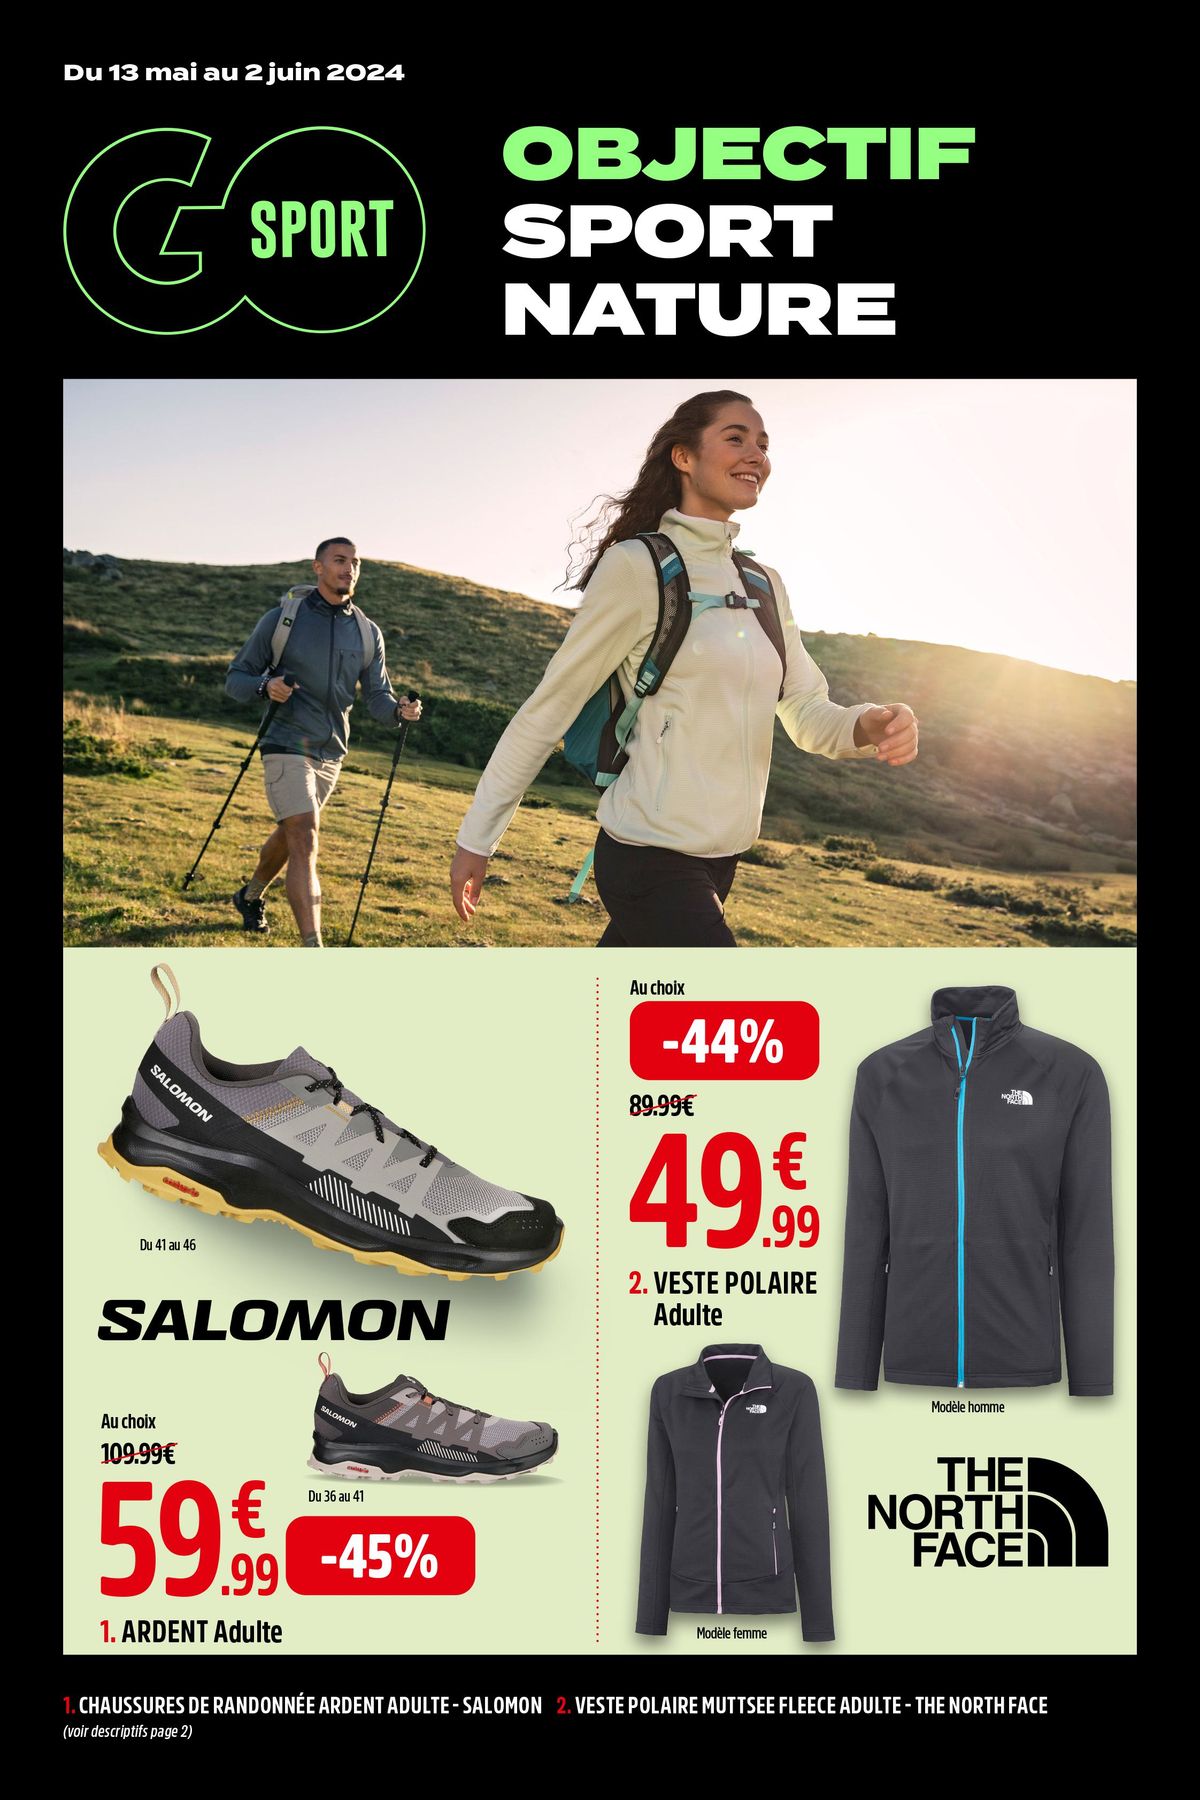 Catalogue OBJECTIF SPORT NATURE, page 00001